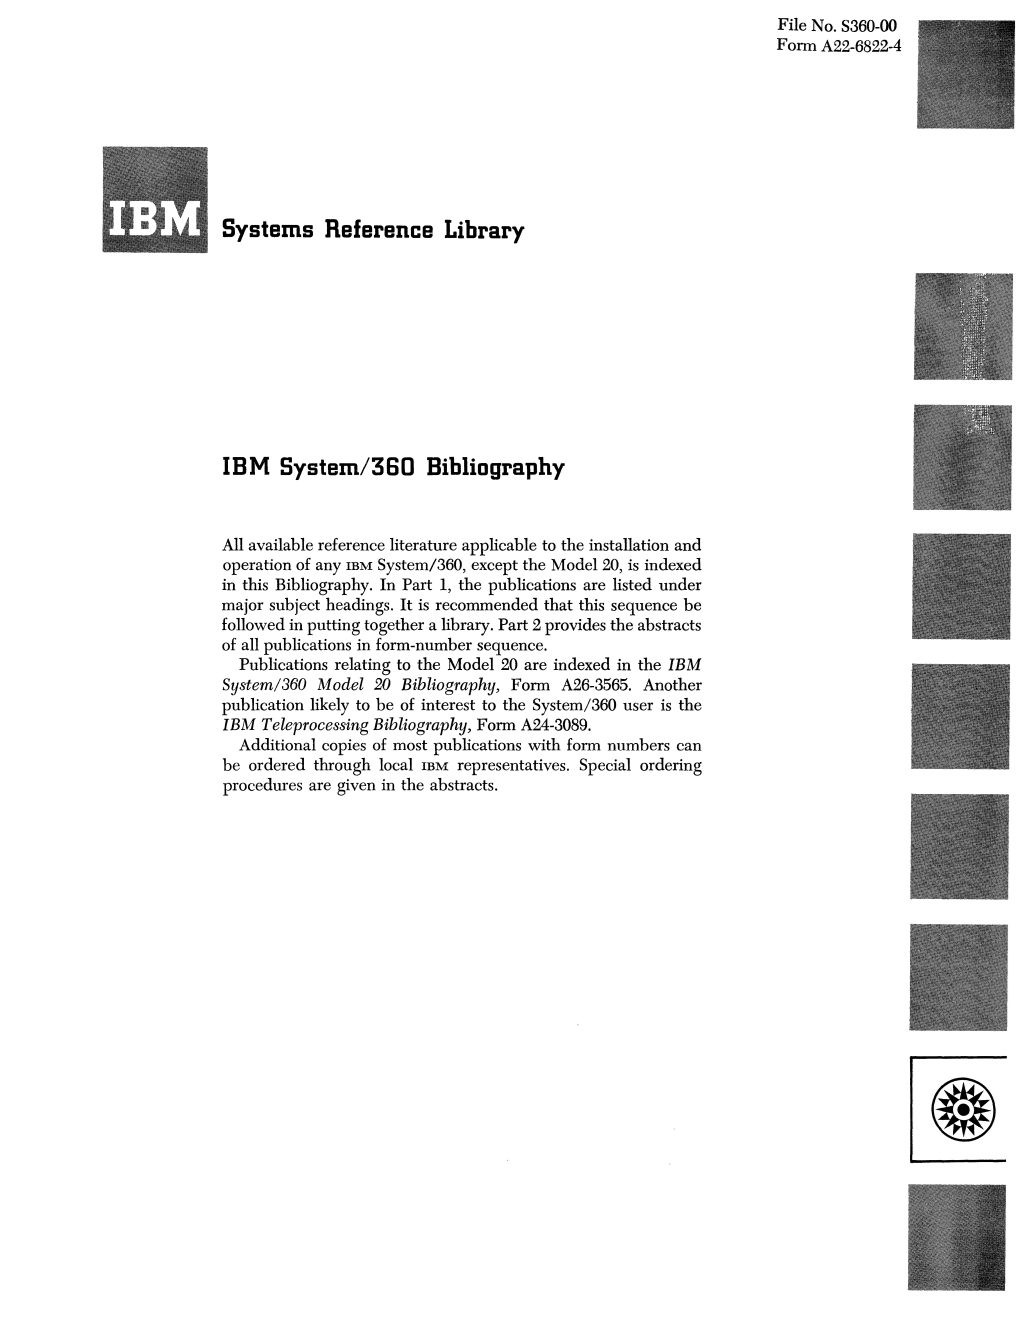 Systems Reference Library IBM System/360 Bibliography